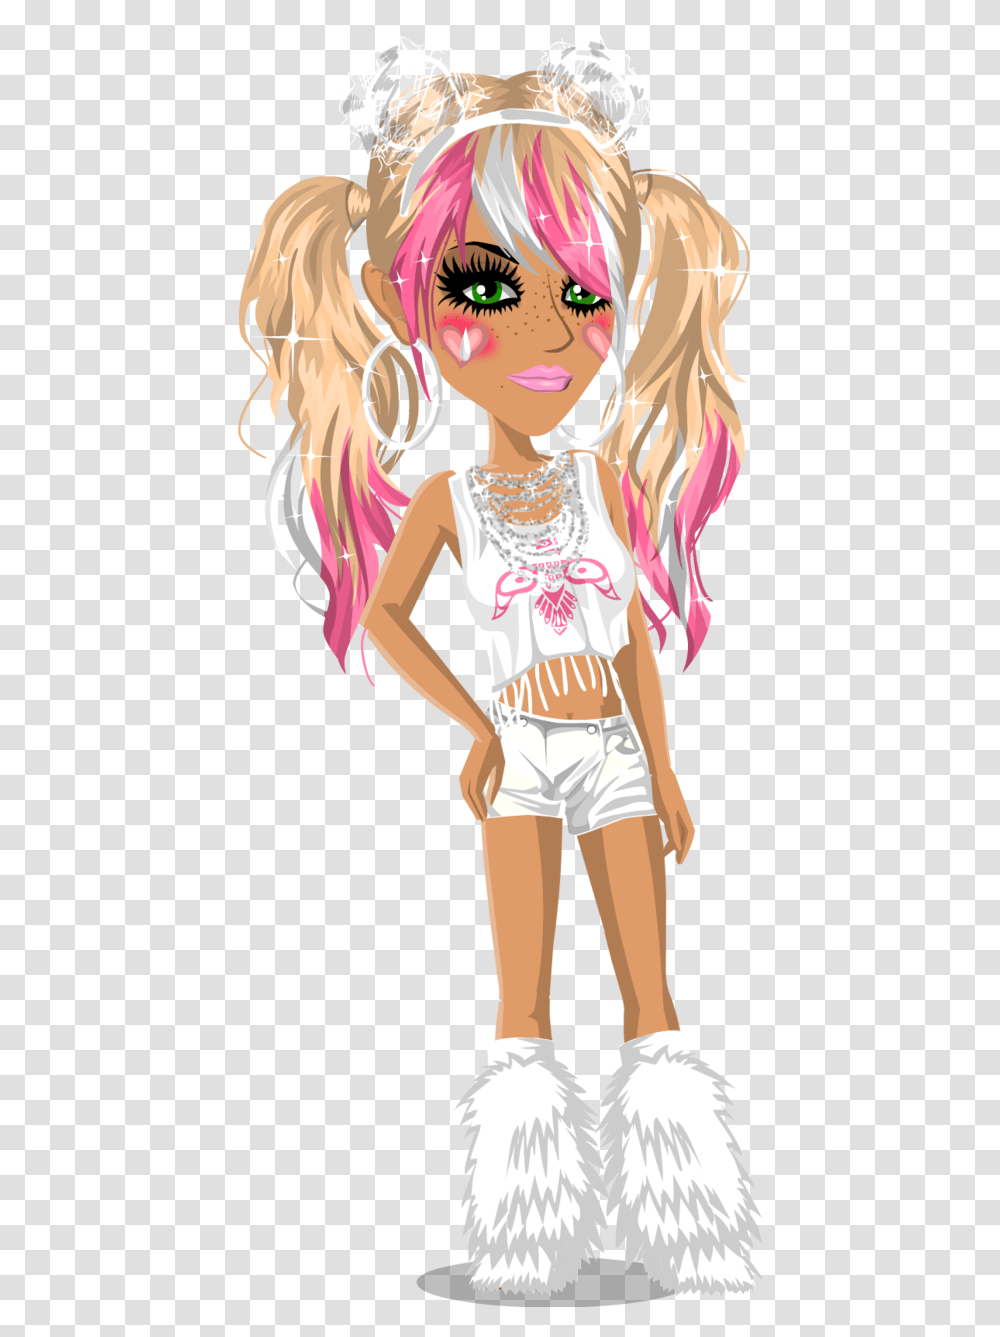 Image In Moviestarplanet Collection By Maria Msp Look 2014, Person, Hair, Shorts, Clothing Transparent Png